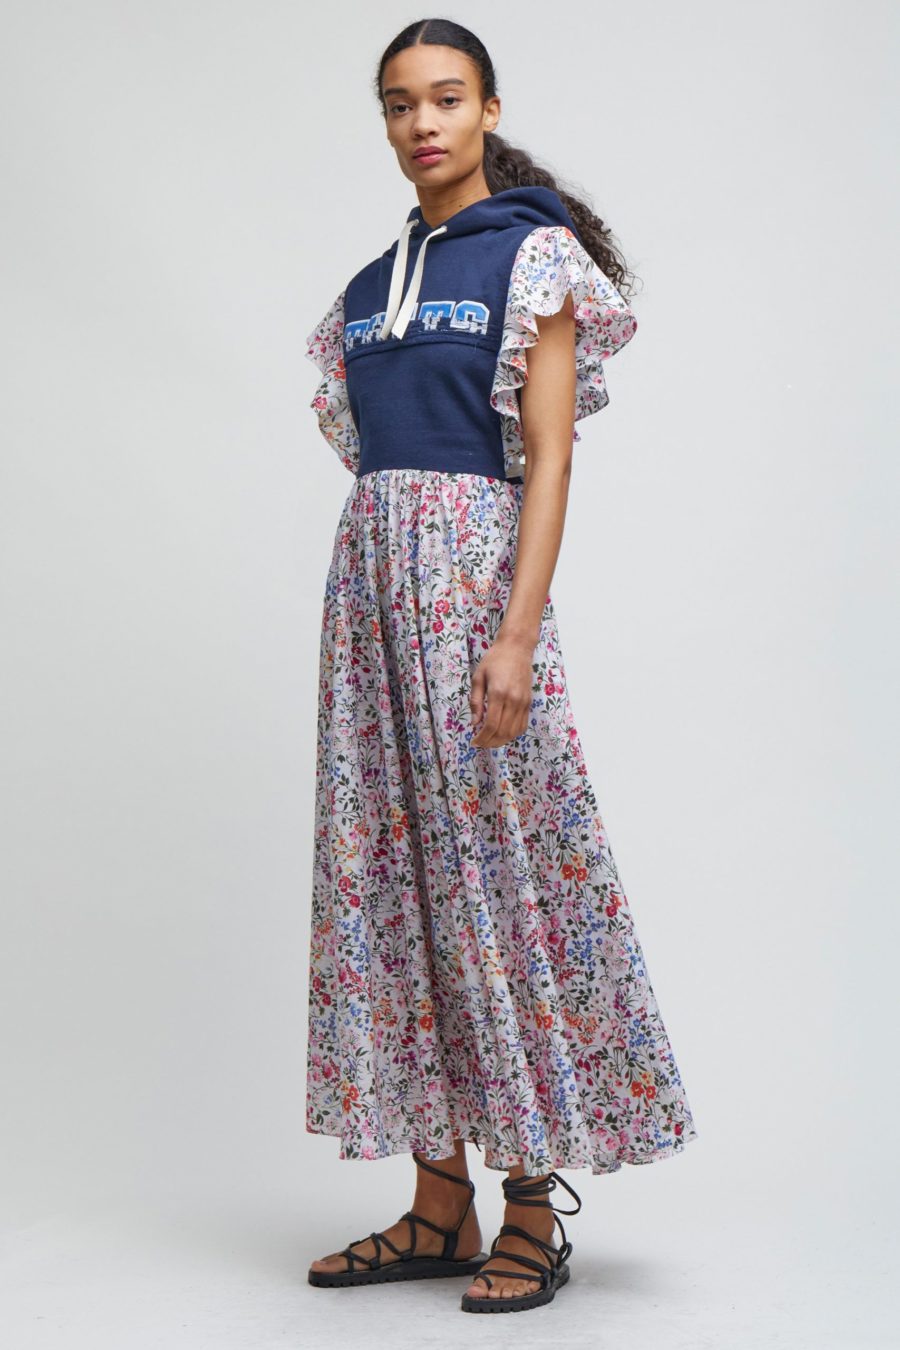 Discover Rentrayage, the eco brand re-imagining classic silhouettes with upcycled creations that are the epitome of old-made-new. Lilac floral summer dress with sweatshirt